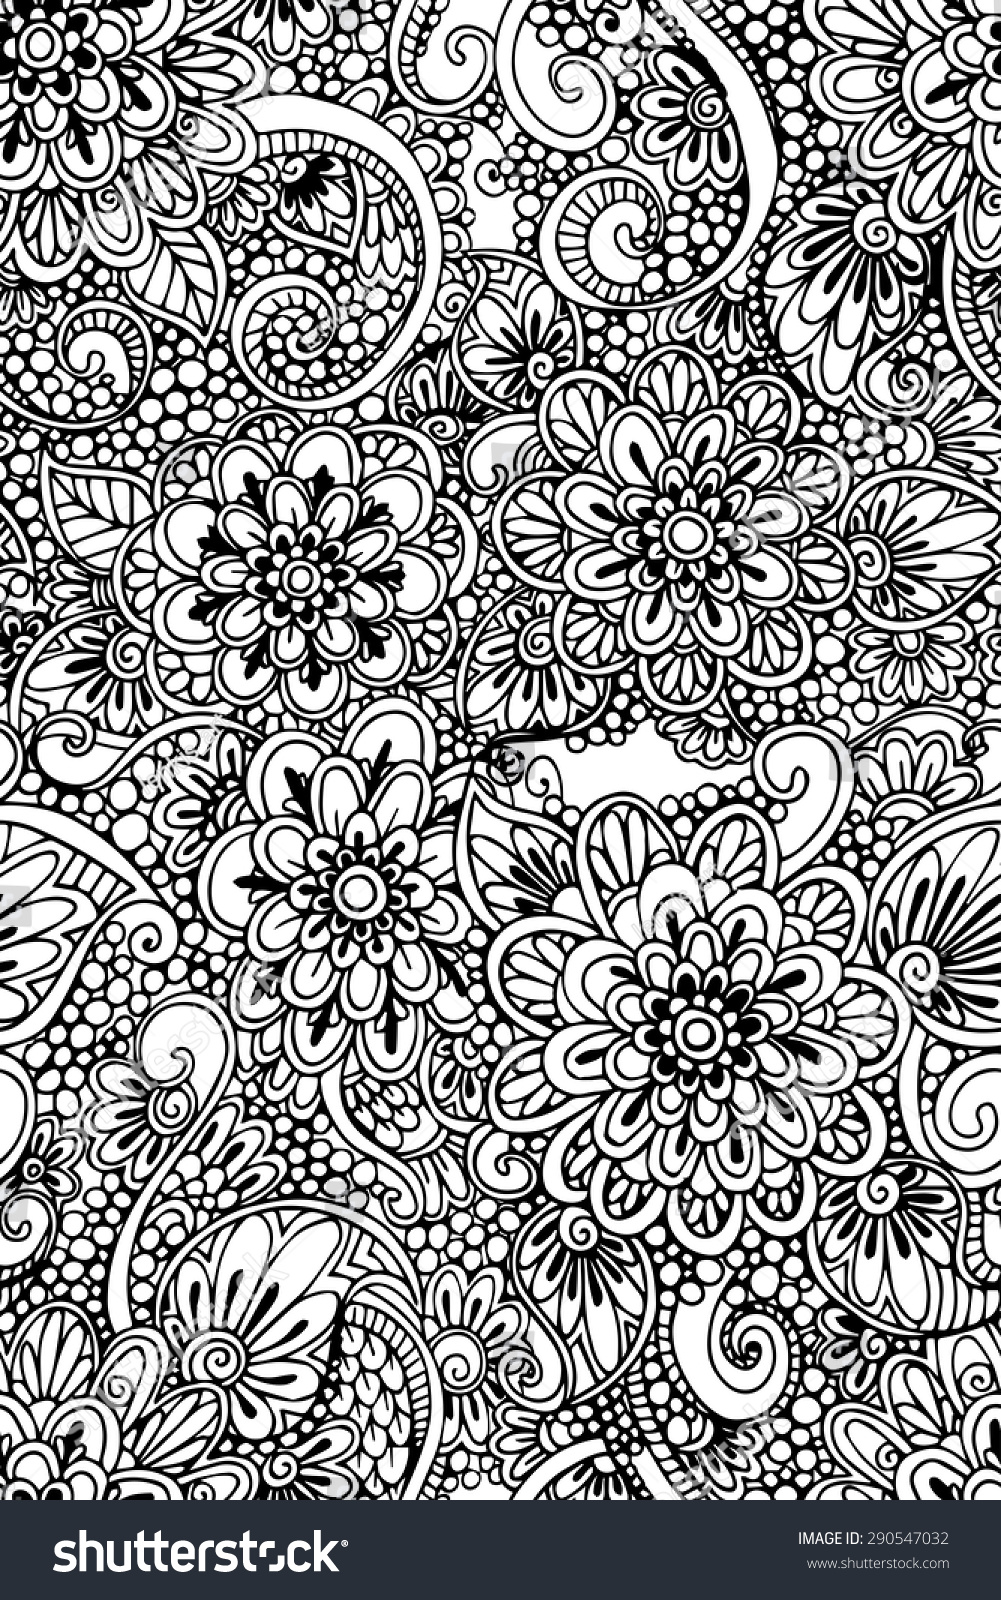 Vector Hand Drawn Decorative Abstract Pattern. Seamless Doodle Floral ...